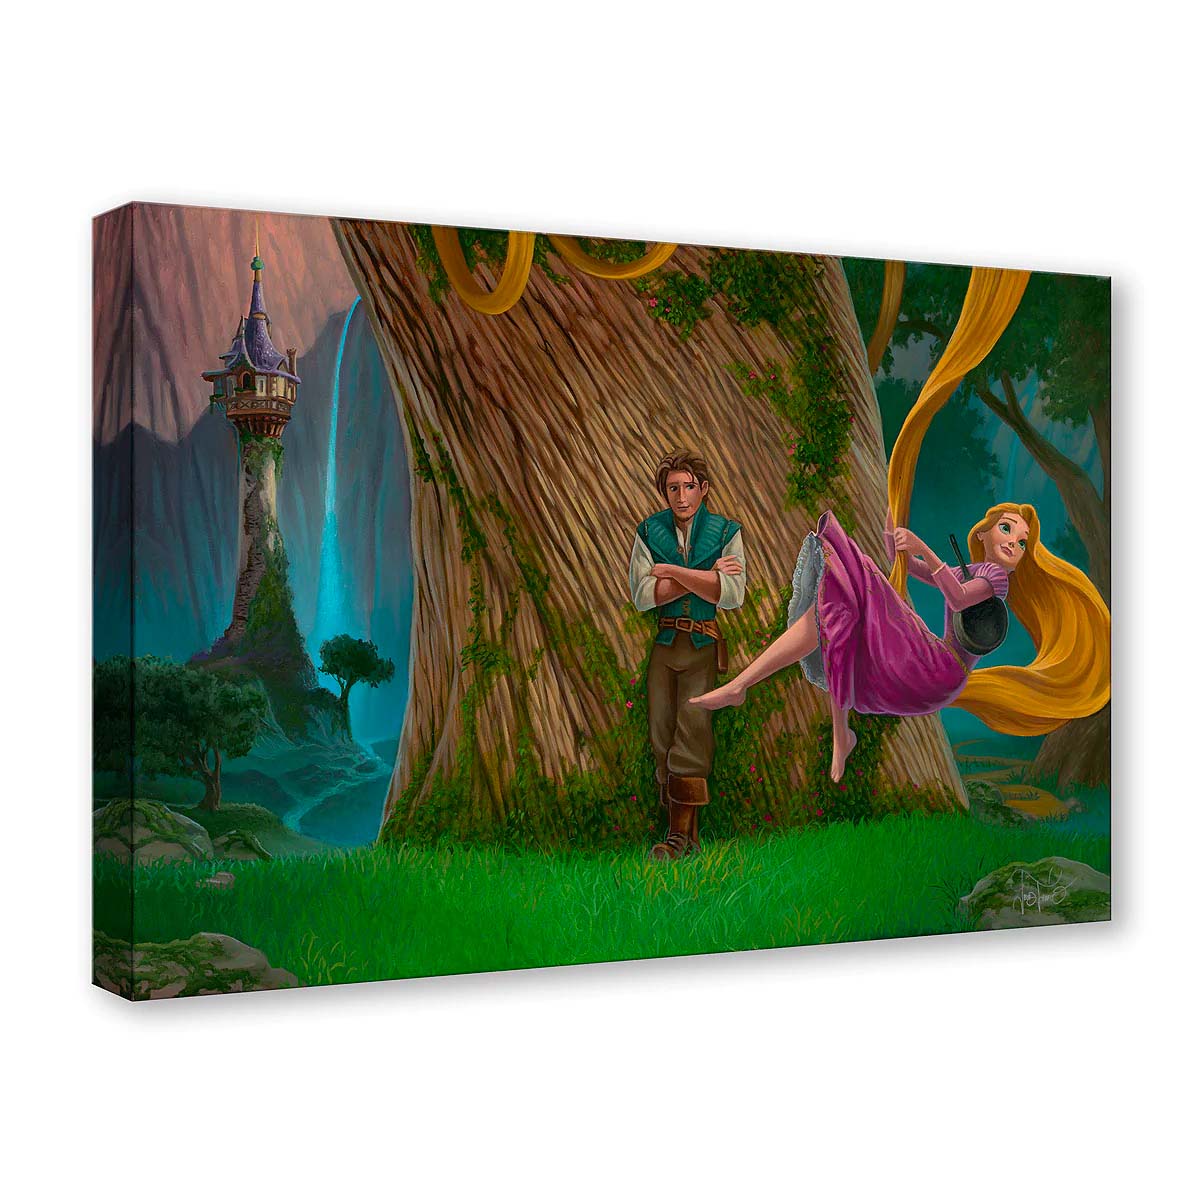 Jared Franco Disney "Tangled Tree" Limited Edition Canvas Giclee